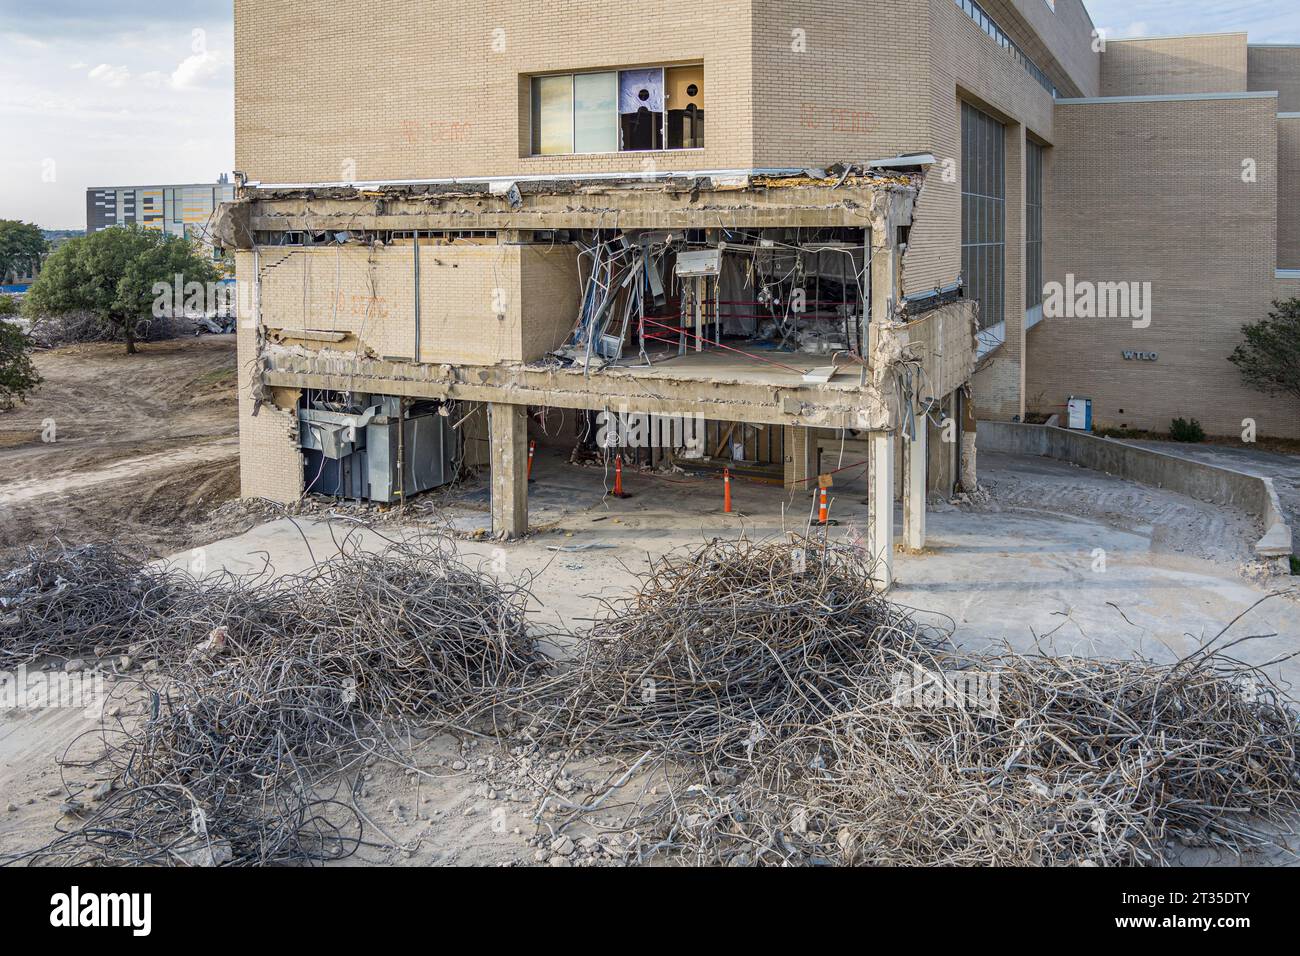 Piles of metal rebar for recycling at demolition site, Fort Worth Texas, USA Stock Photo